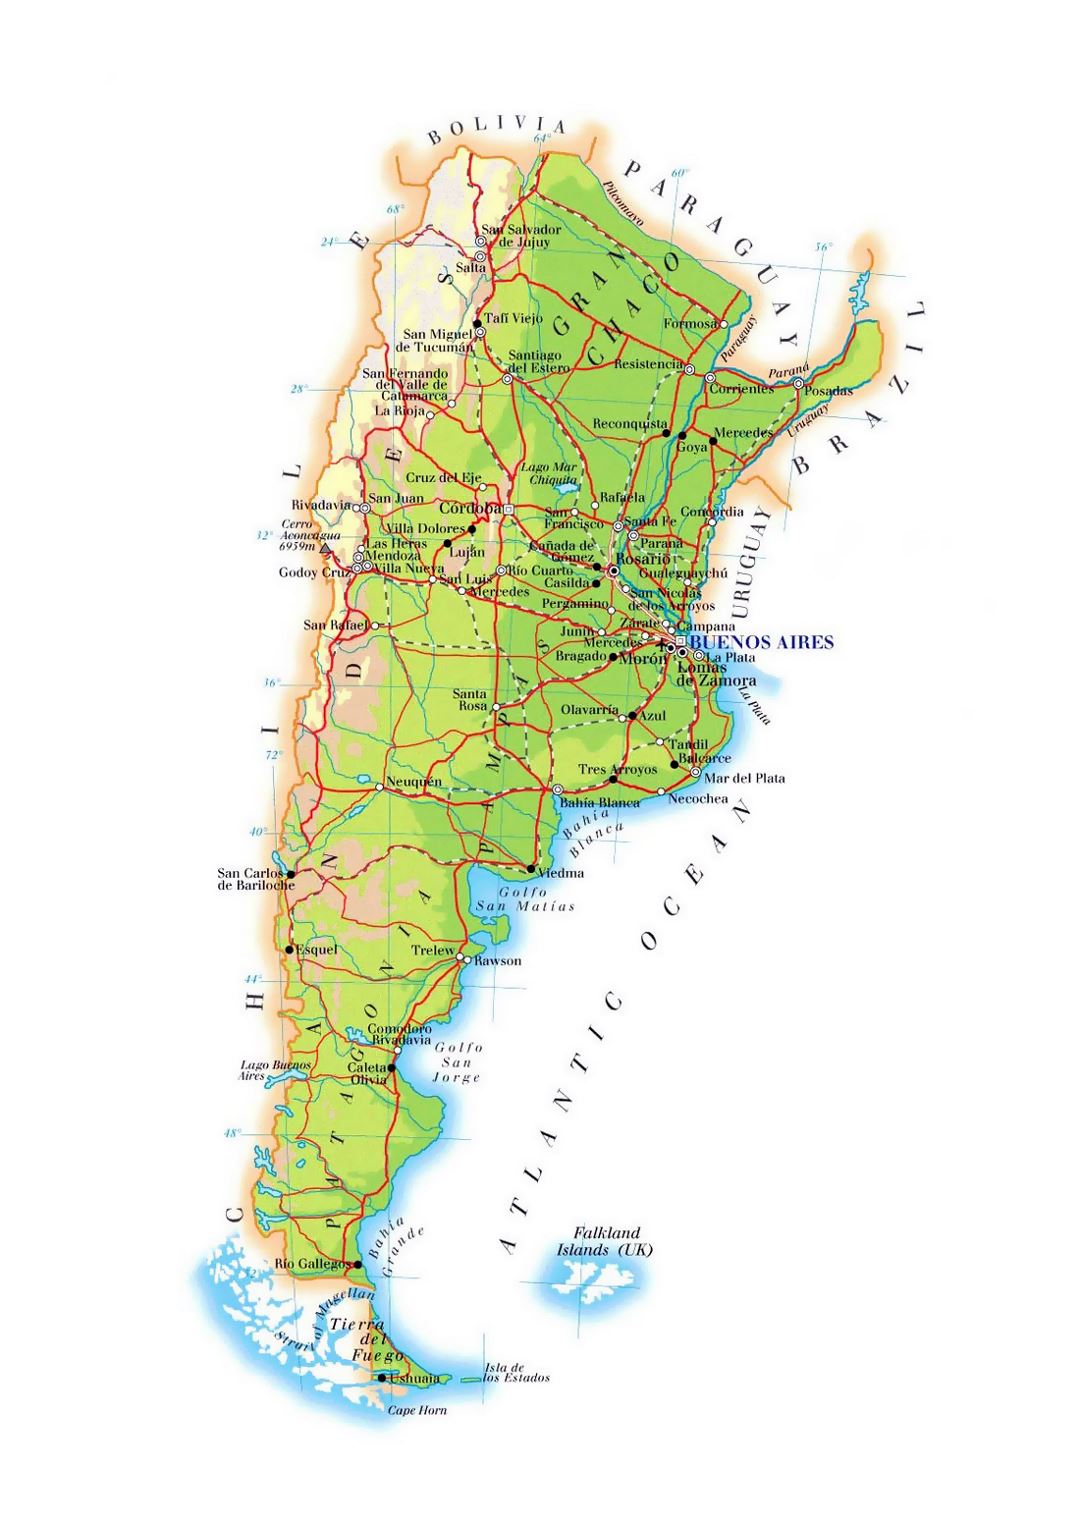 Large elevation map of Argentina with roads, cities and airports